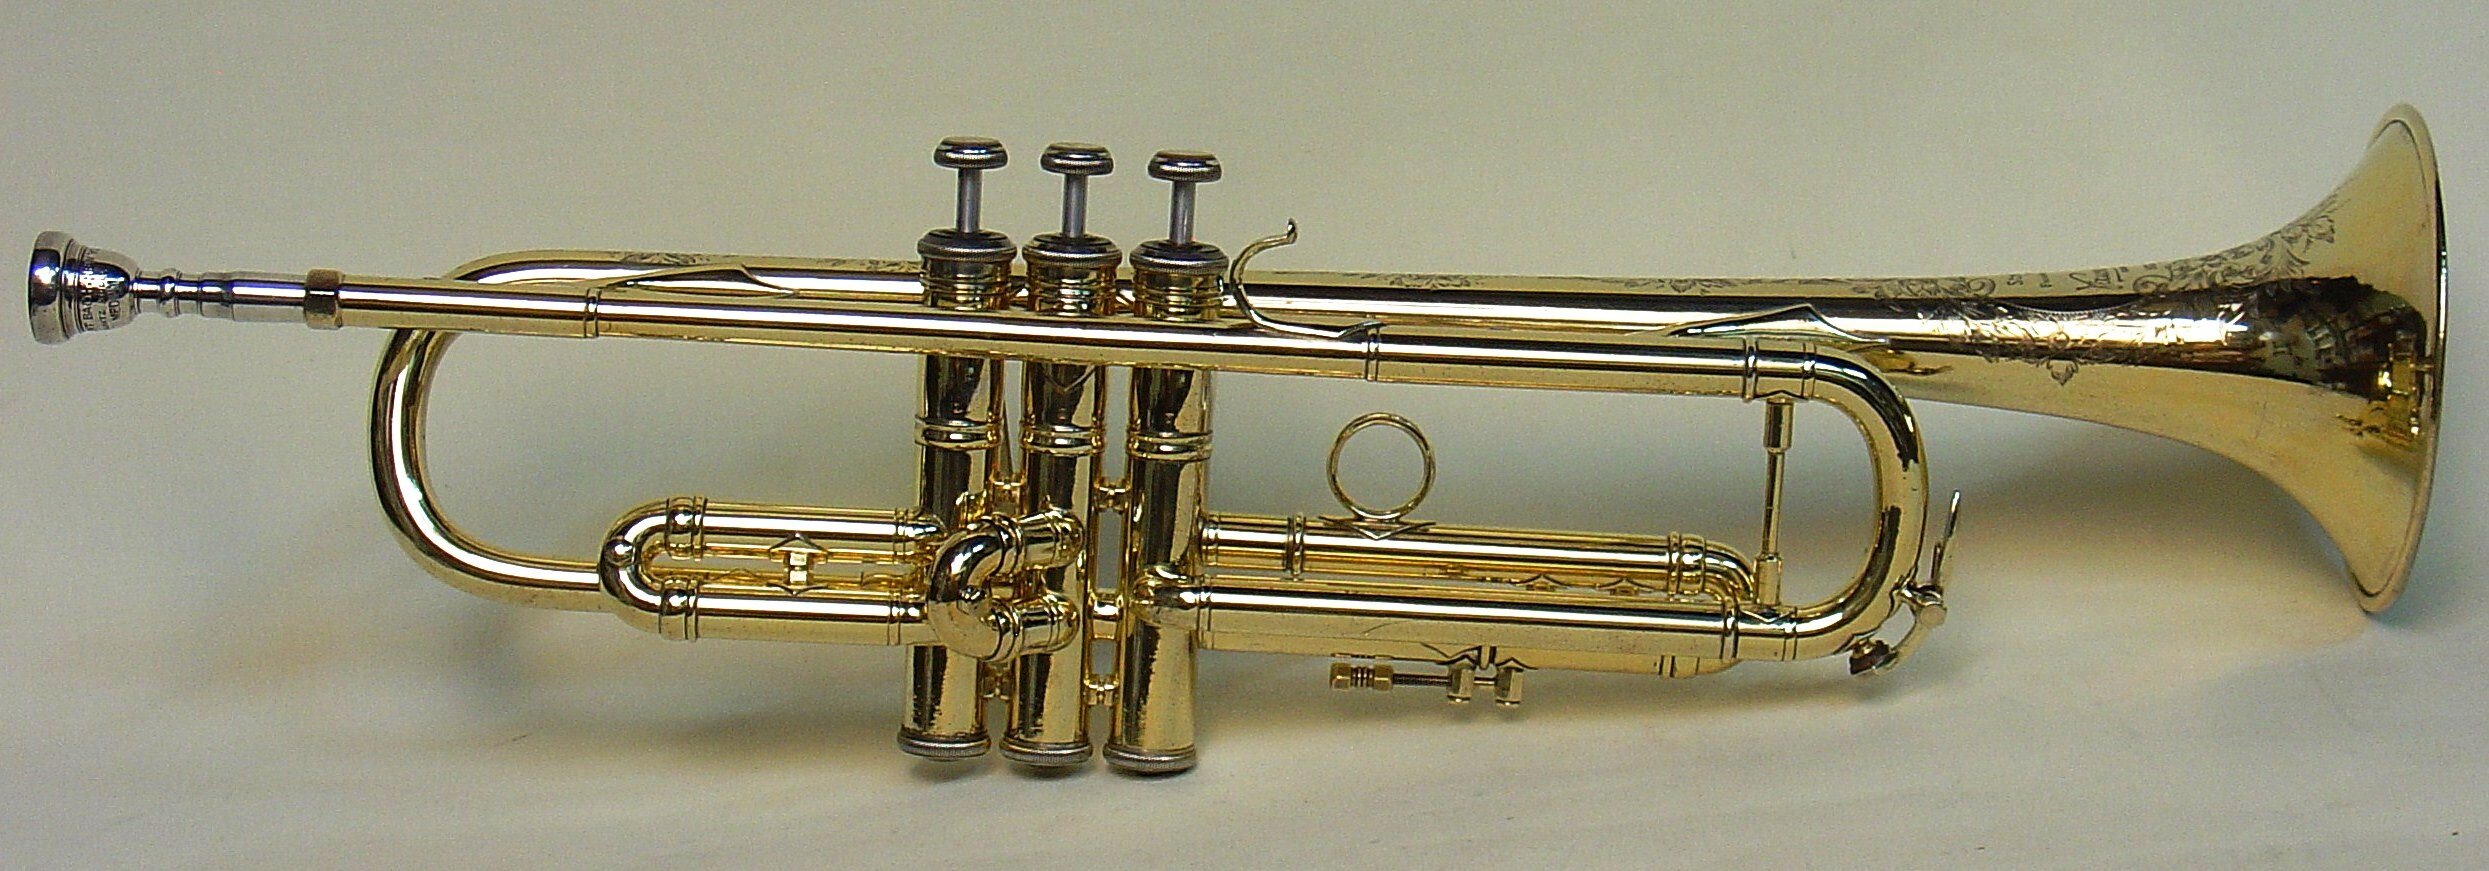 Gallery of Bach Trumpets